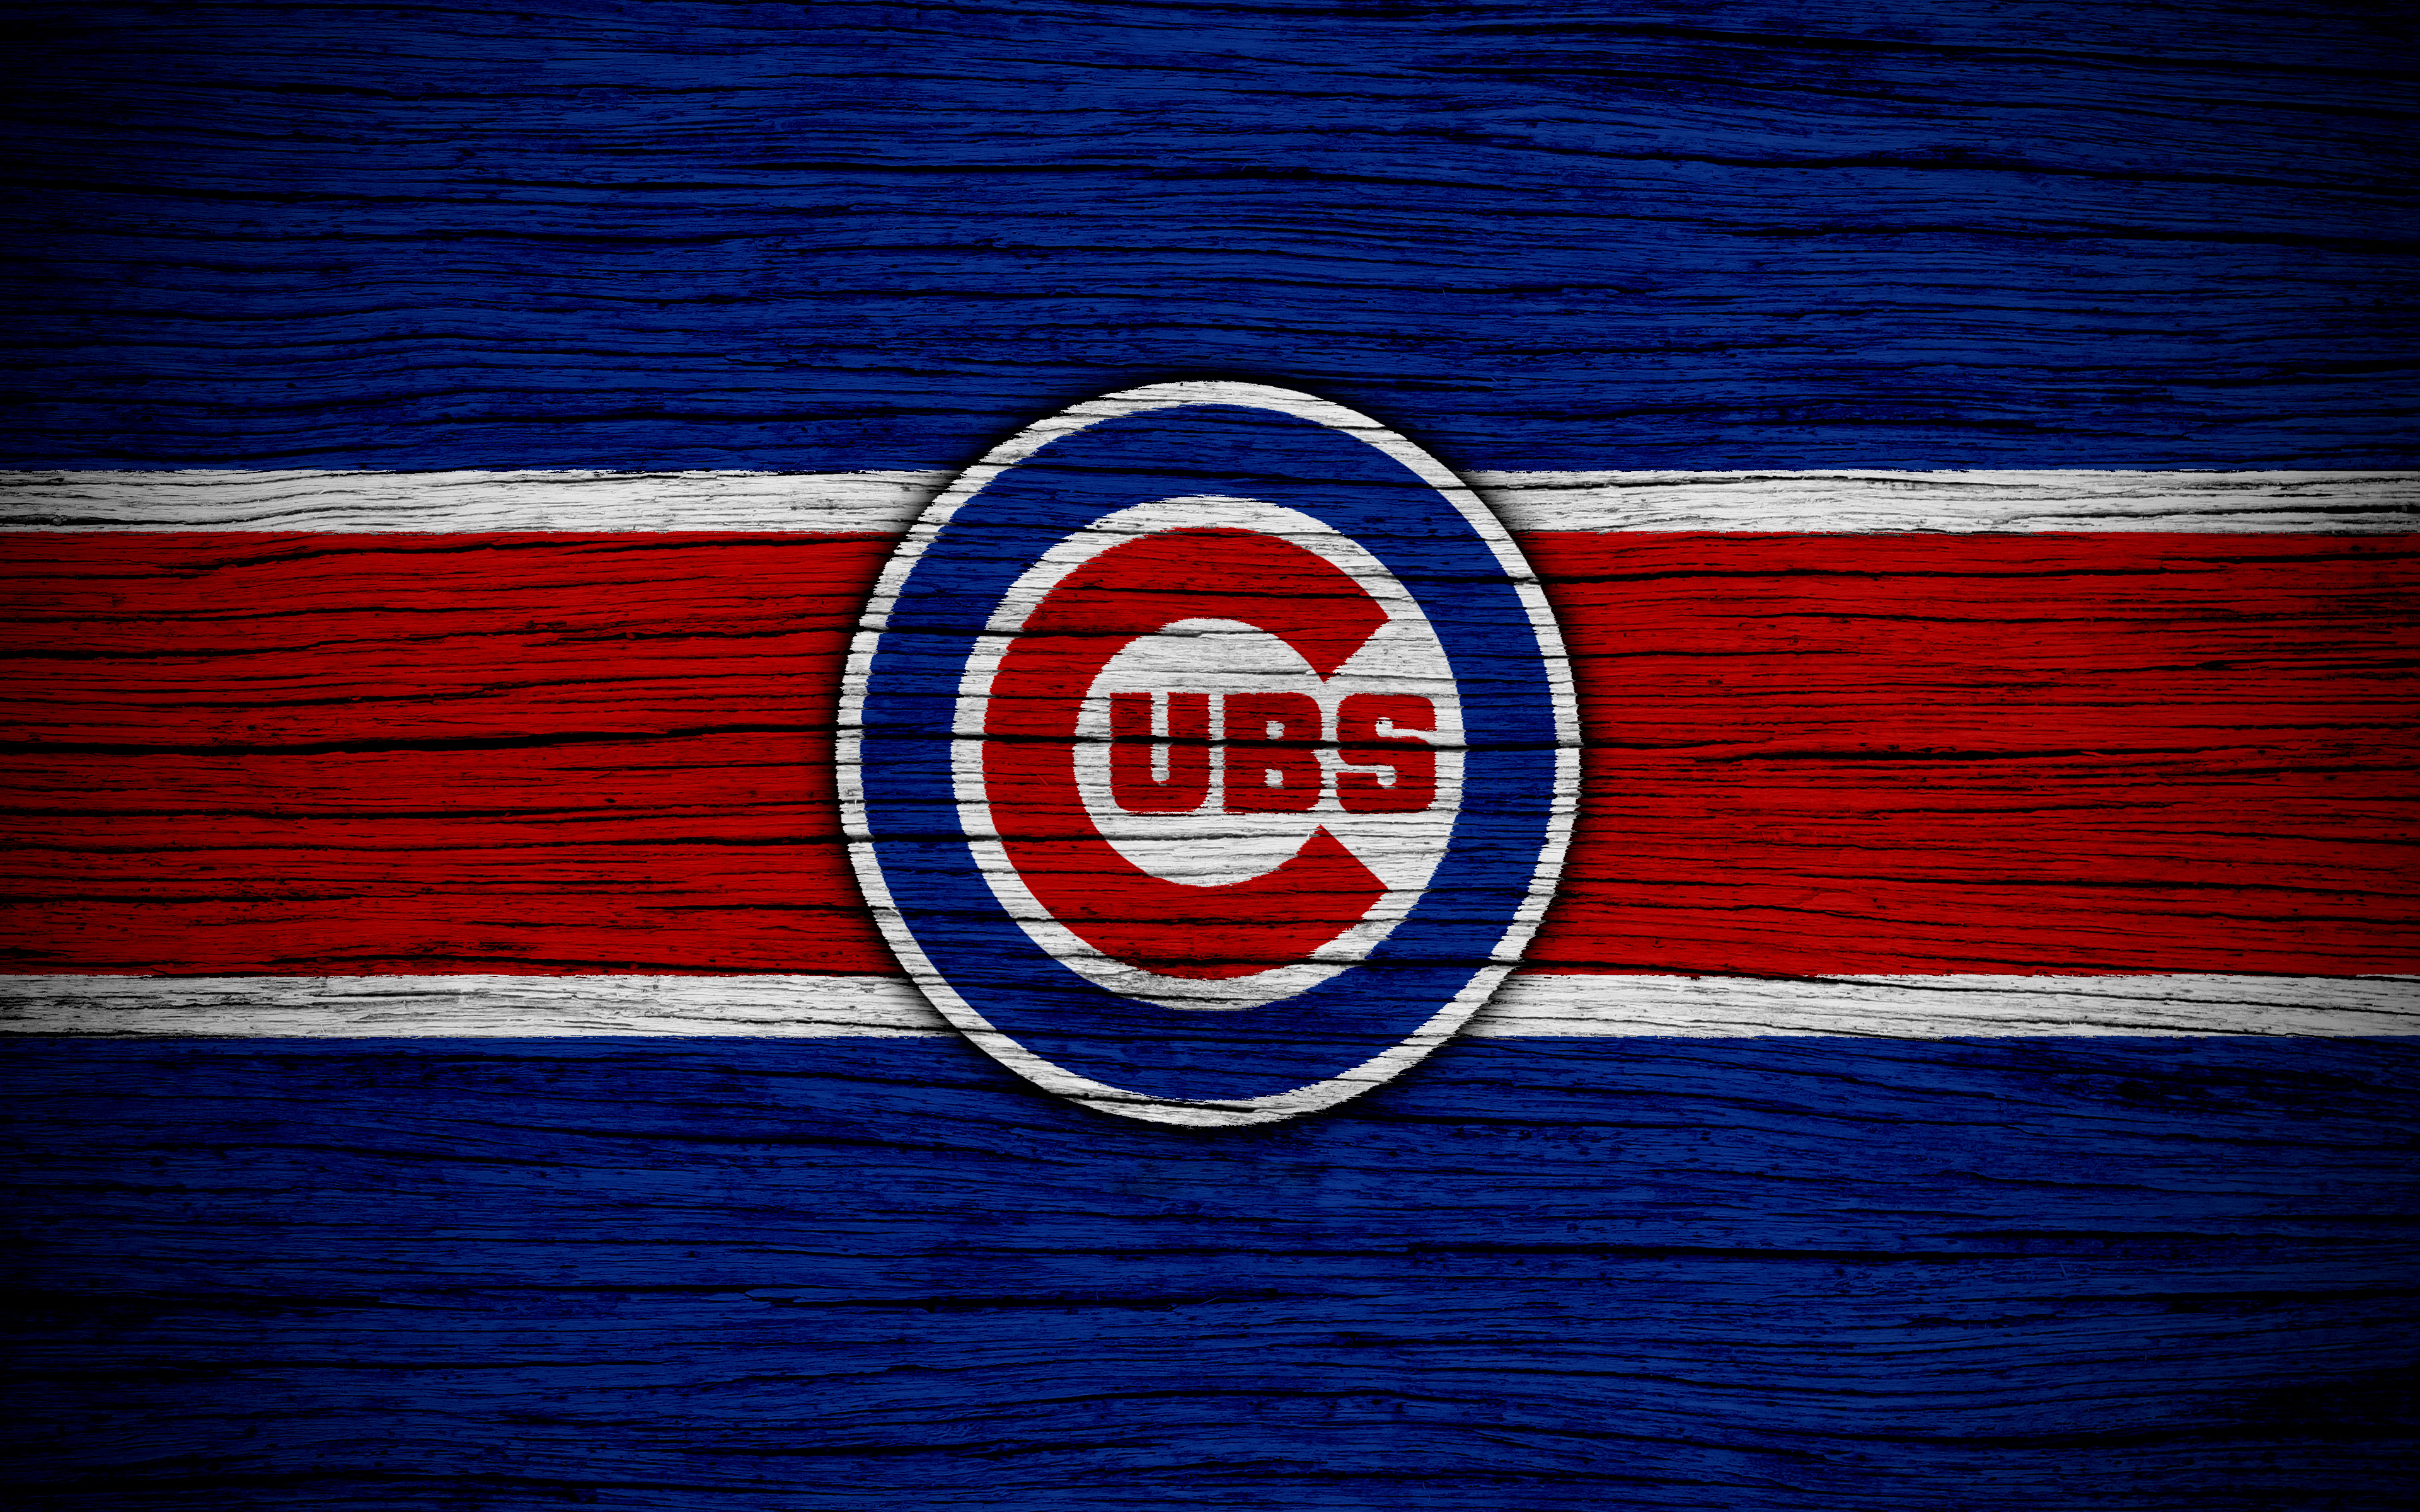 Cubs Wallpapers - KoLPaPer - Awesome Free HD Wallpapers